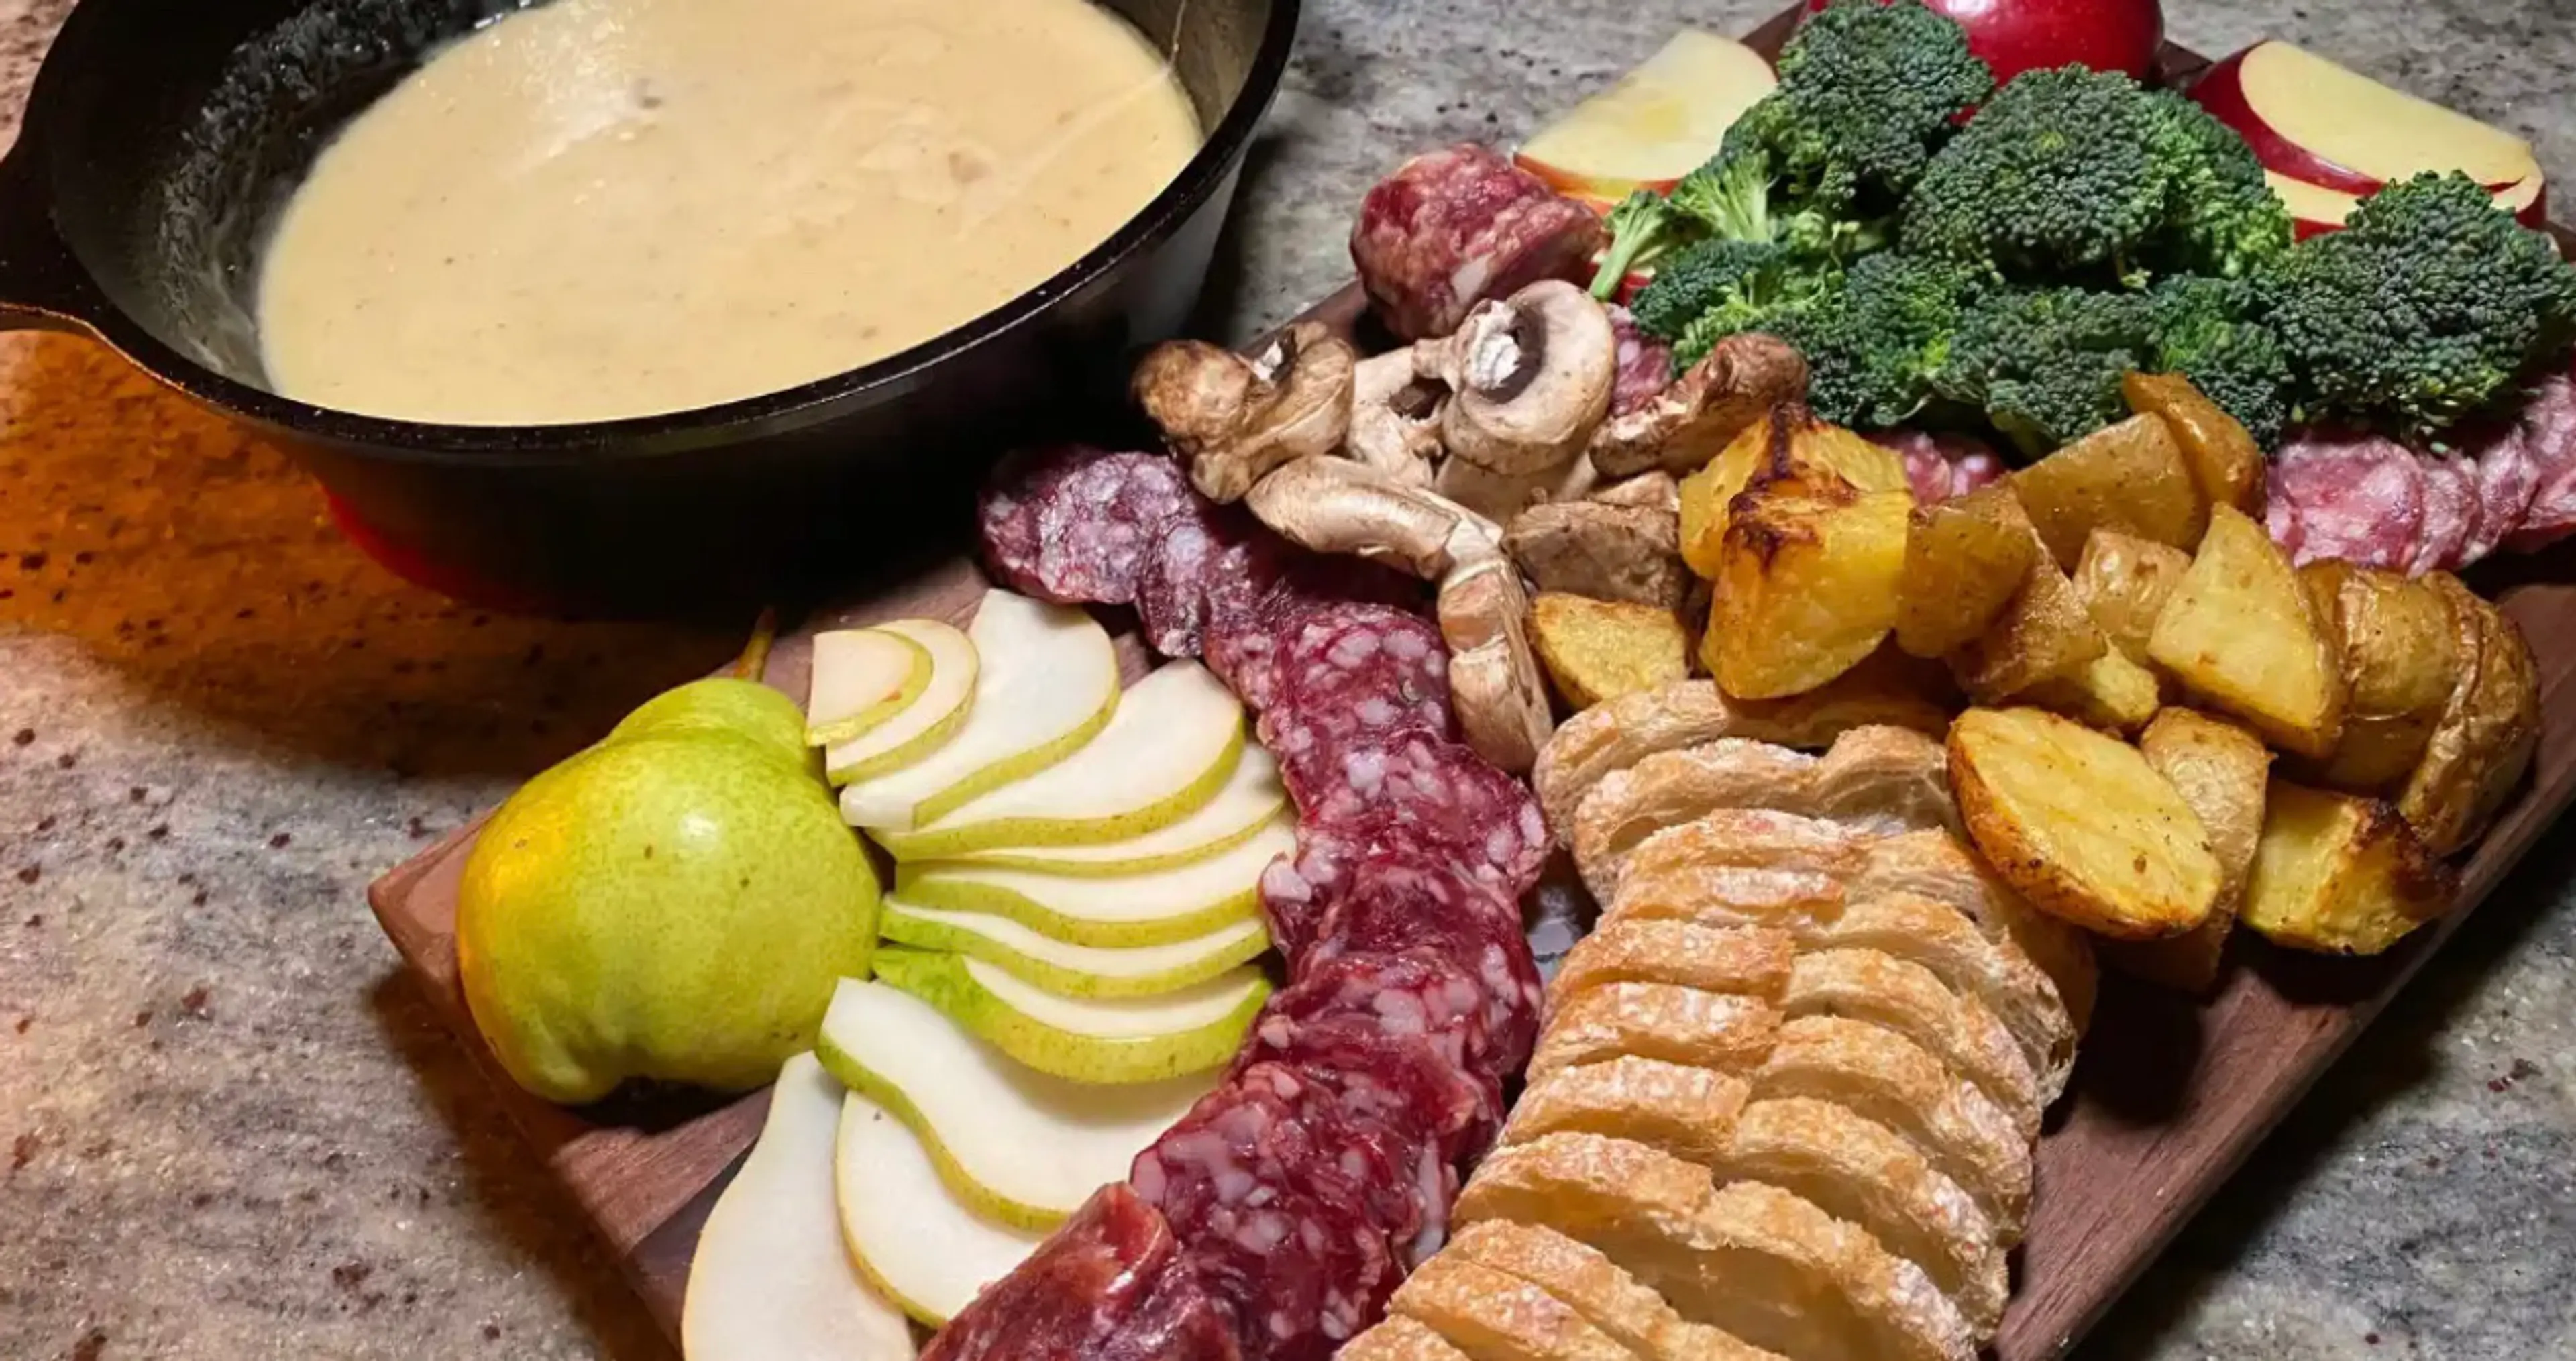 Innkeeper's Fondue and Dipping Assortment - DnD Inspired Coo